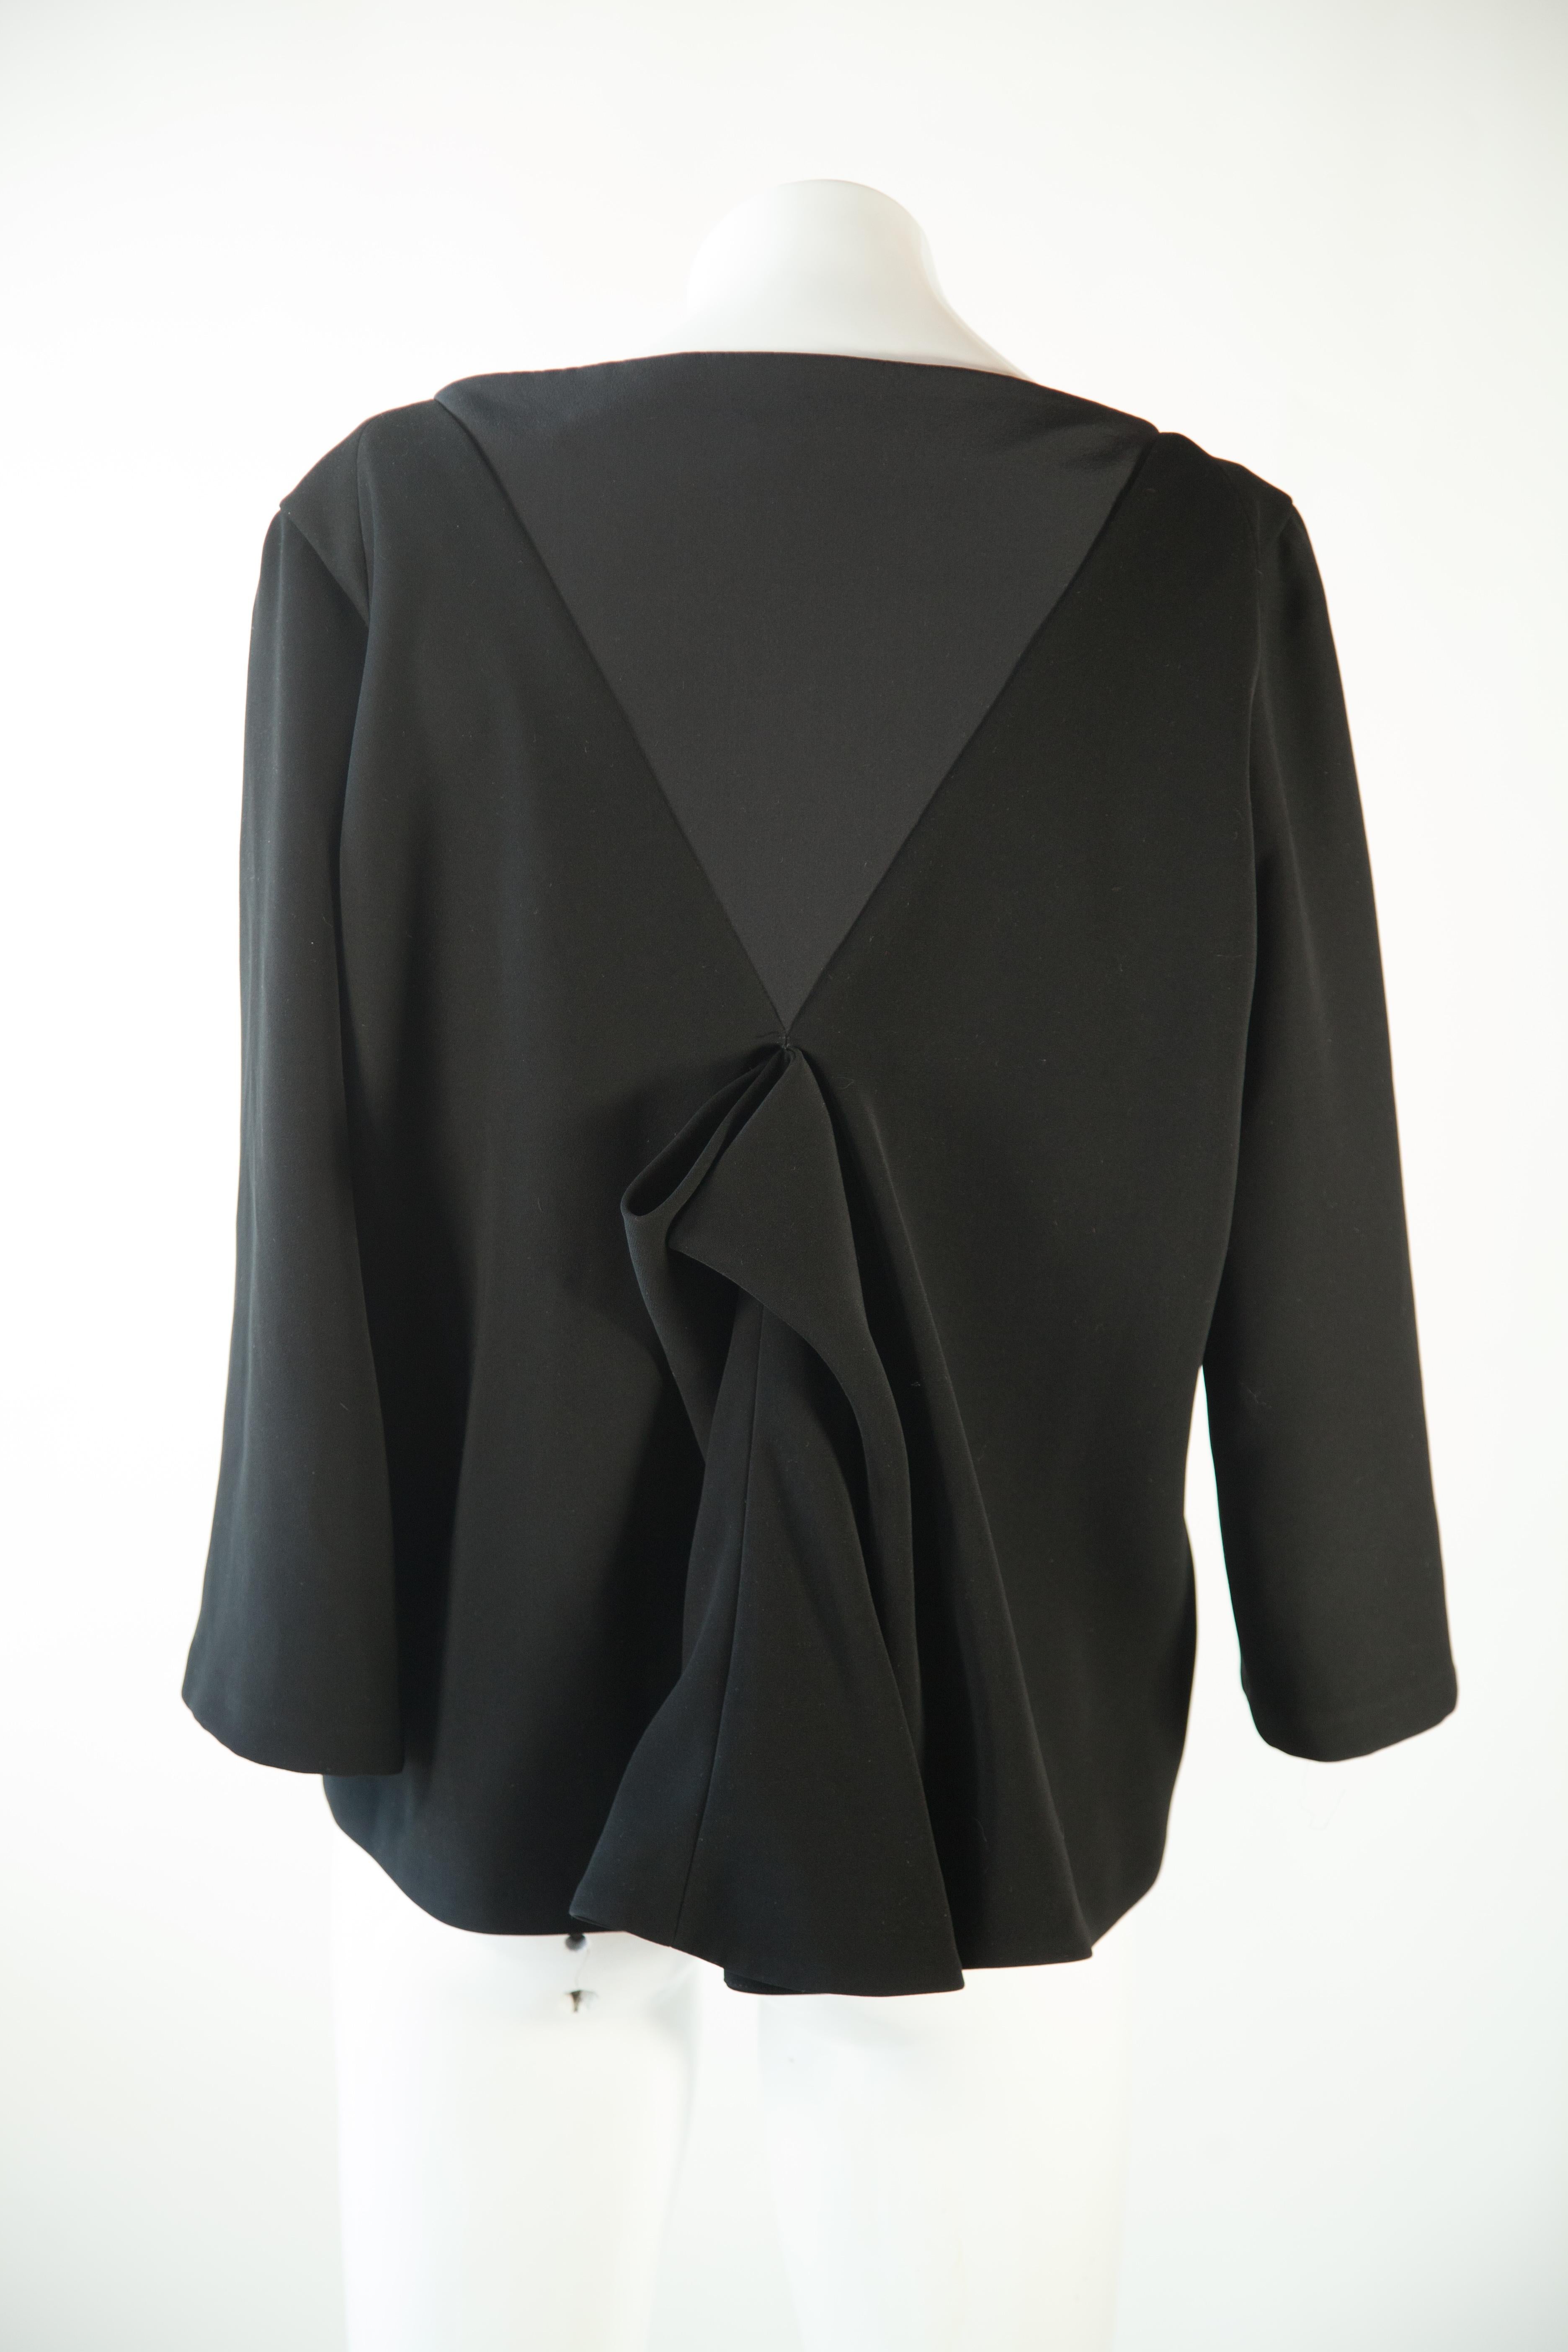 This Balenciaga classic black blouse features an elegant 3/4 sleeve detail and size 42 fit. Its timeless style and quality construction make it perfect for any formal occasion.